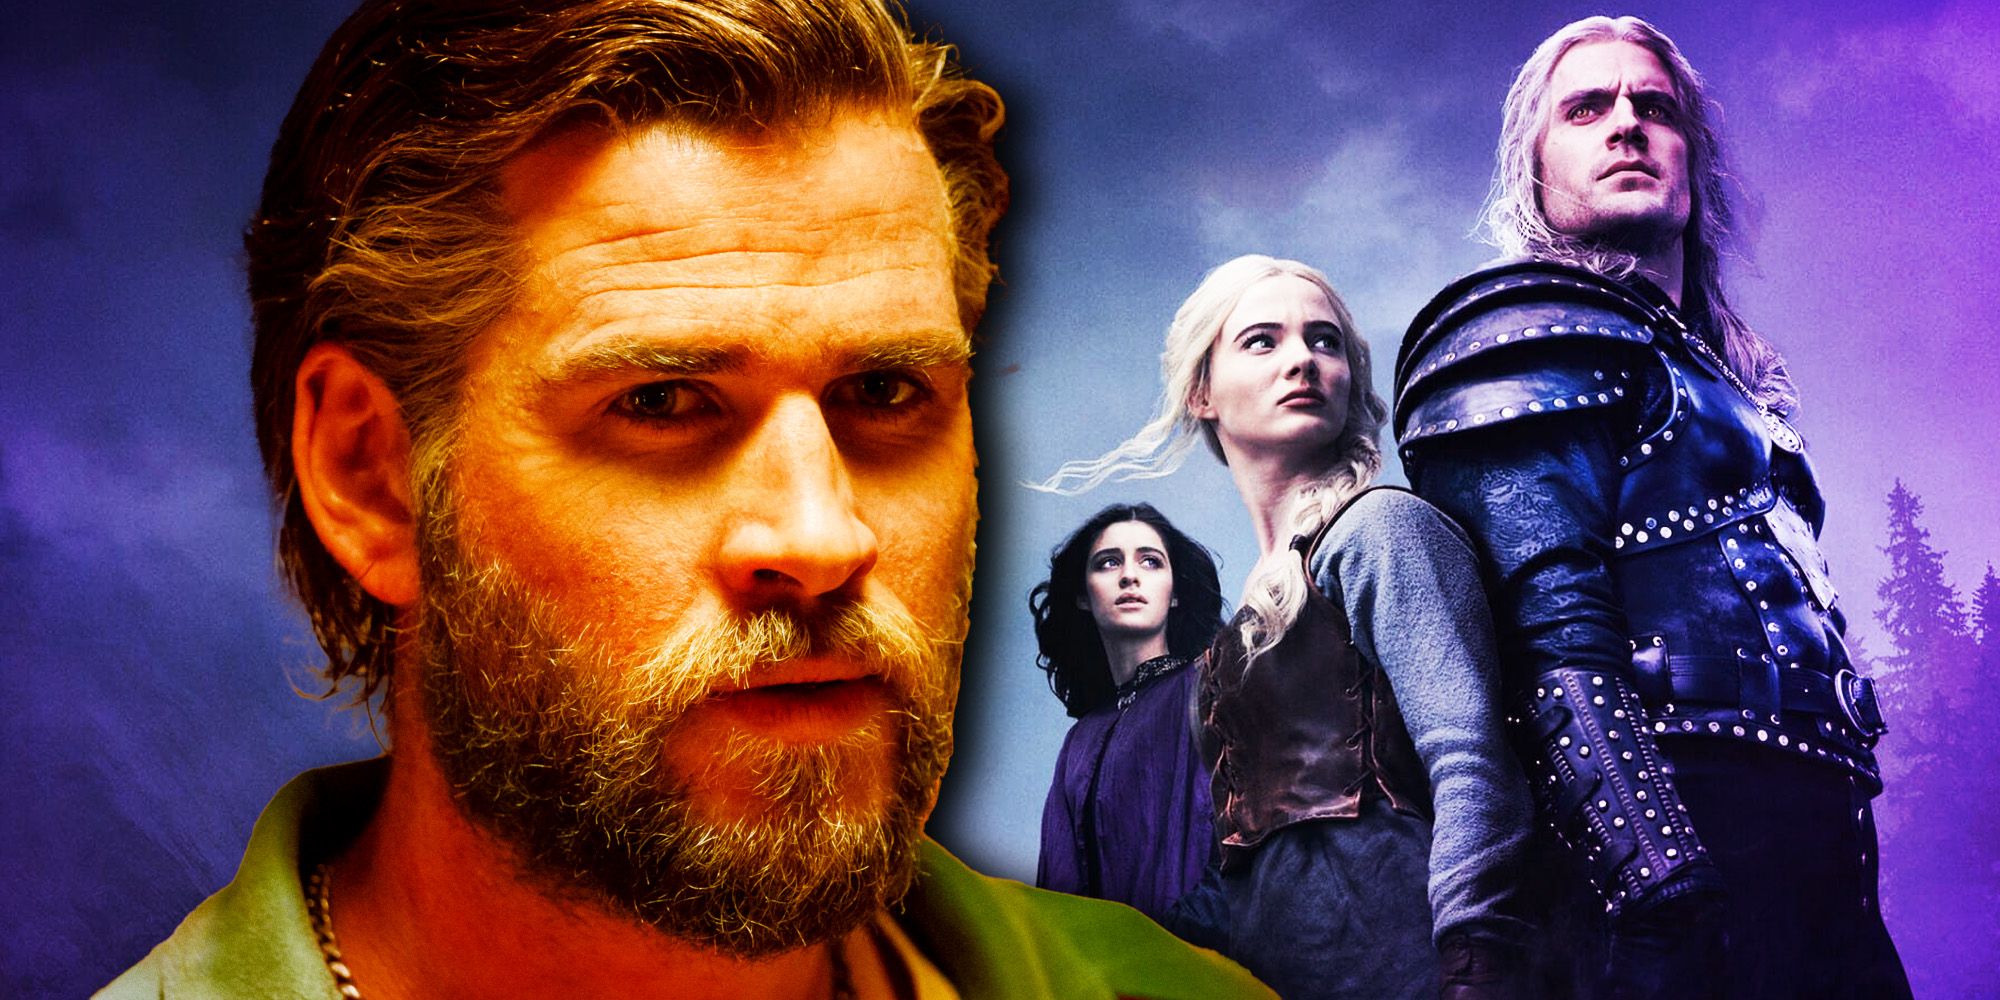 Liam Hemsworth's The Witcher Season 4 Recast Explained: Why Is